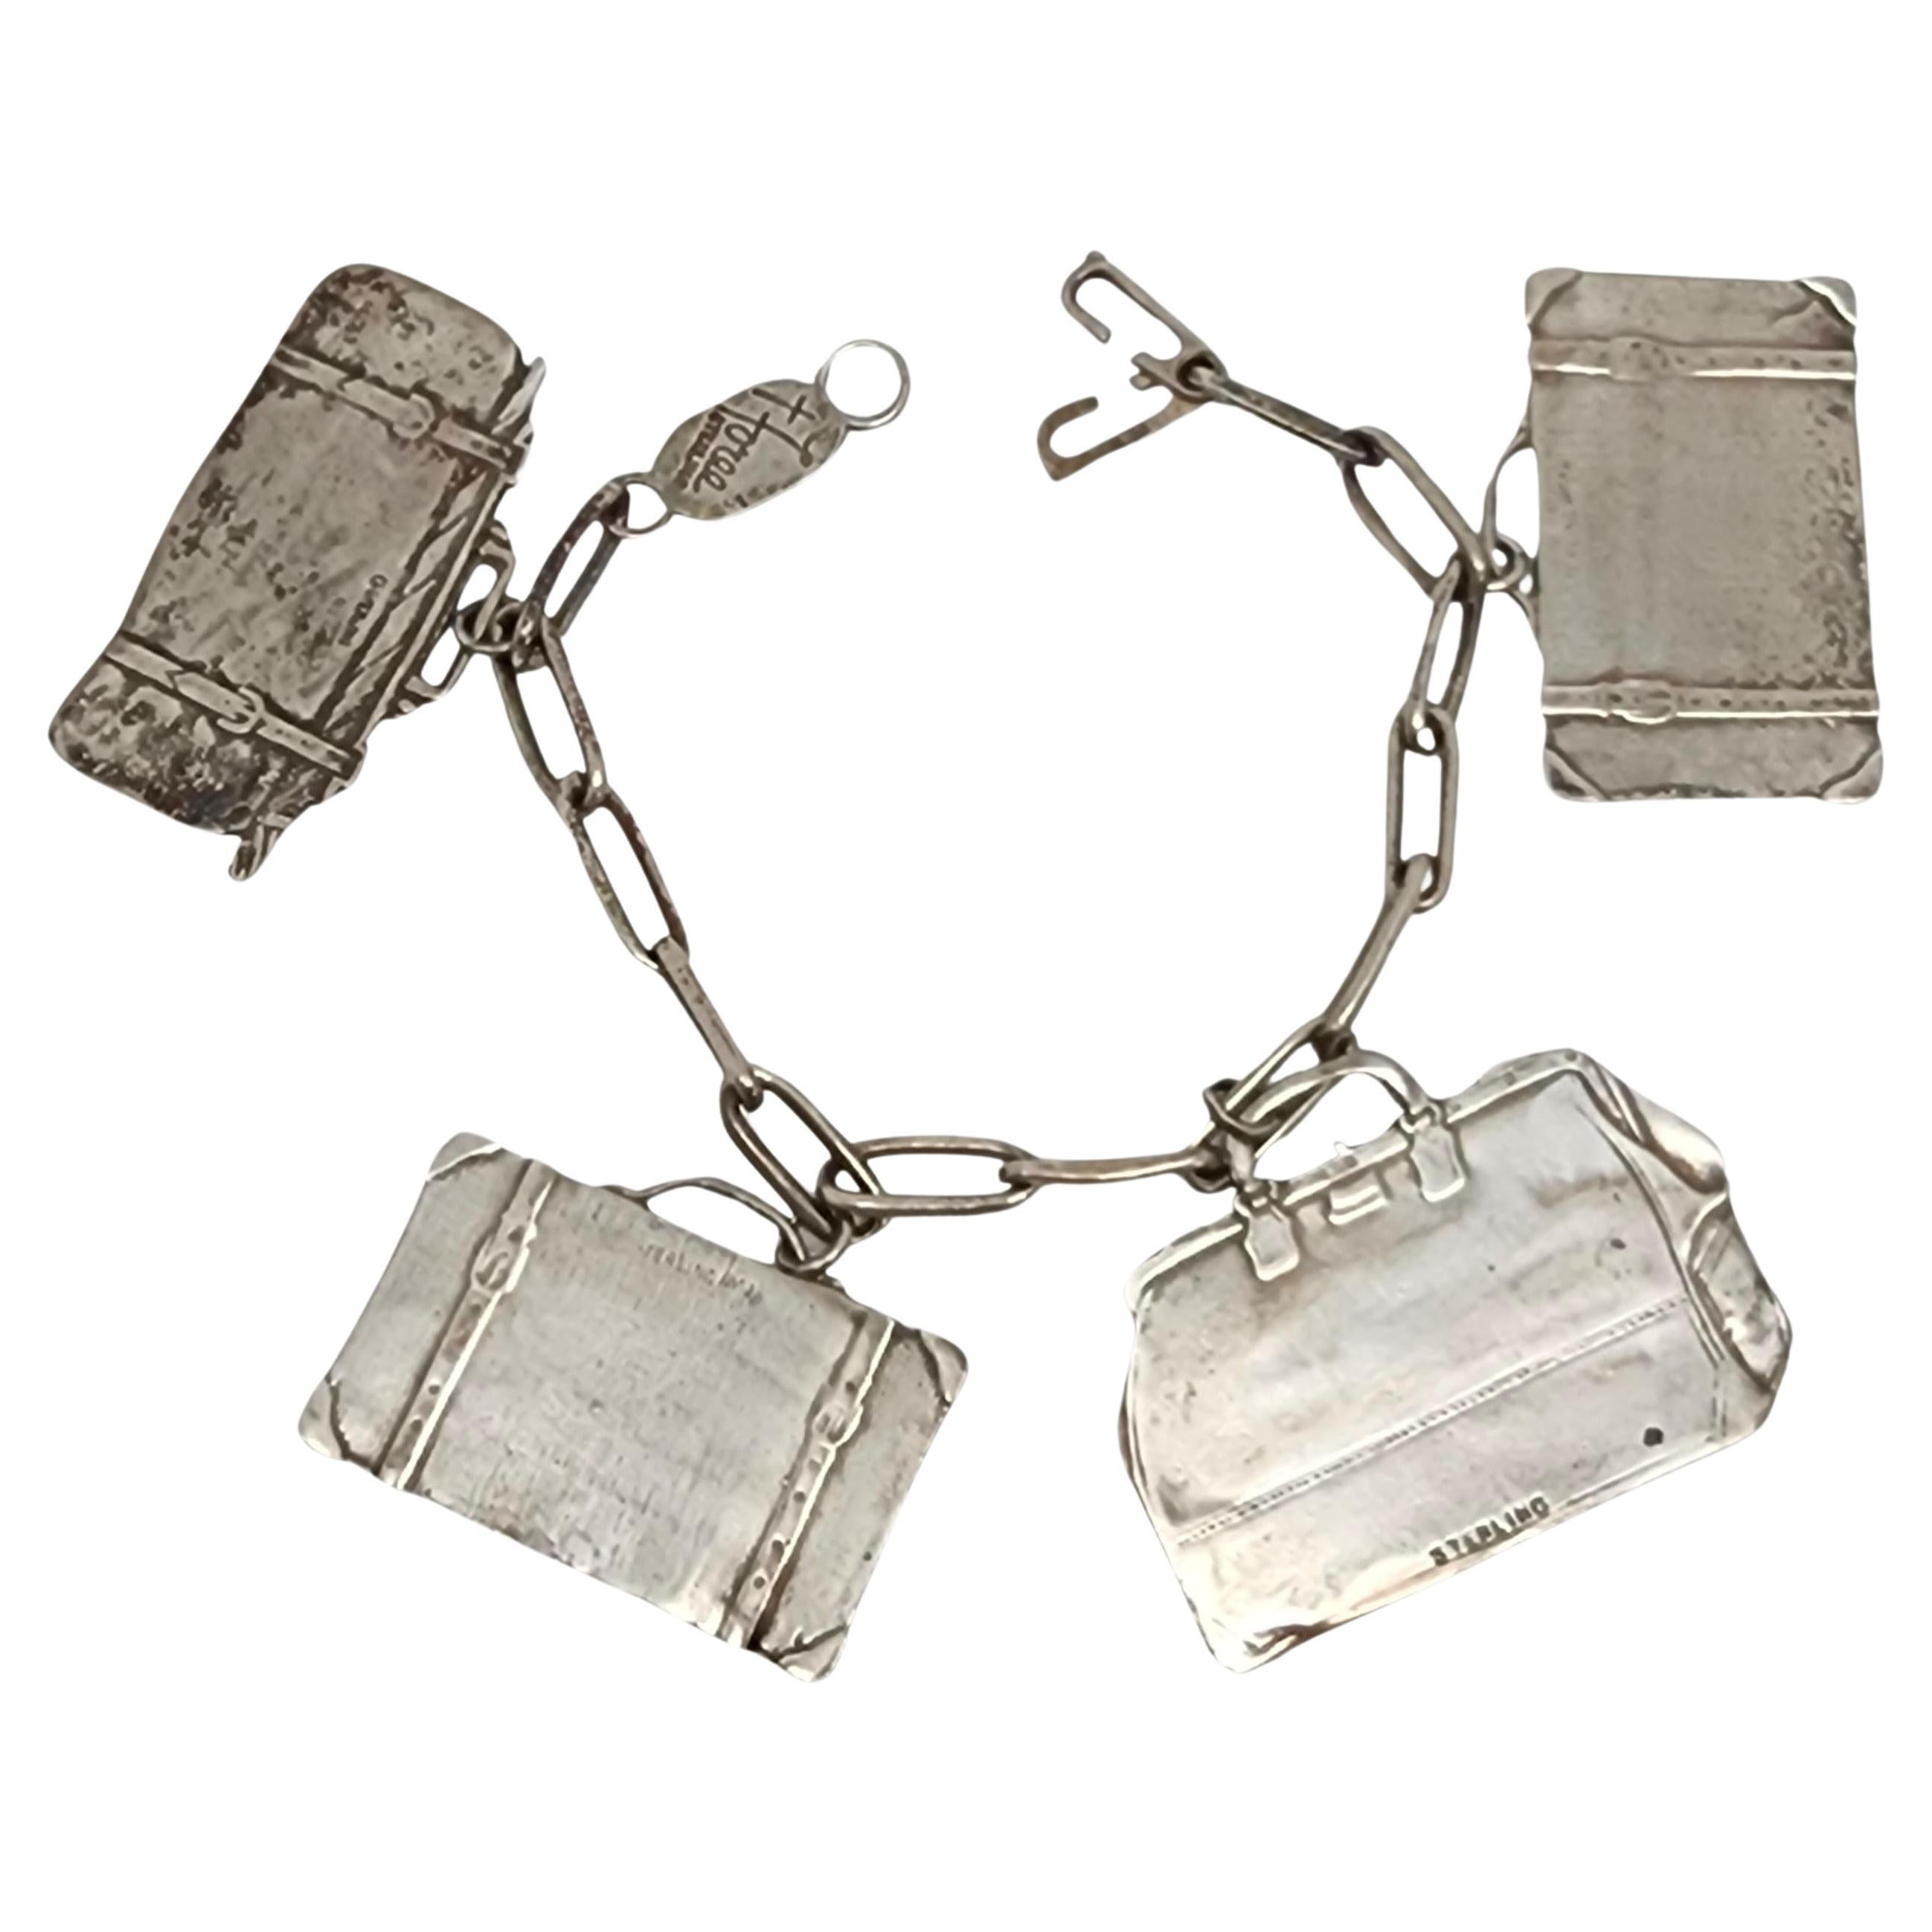 T. Foree Sterling Silver Suitcase/Luggage Charm Bracelet #16051